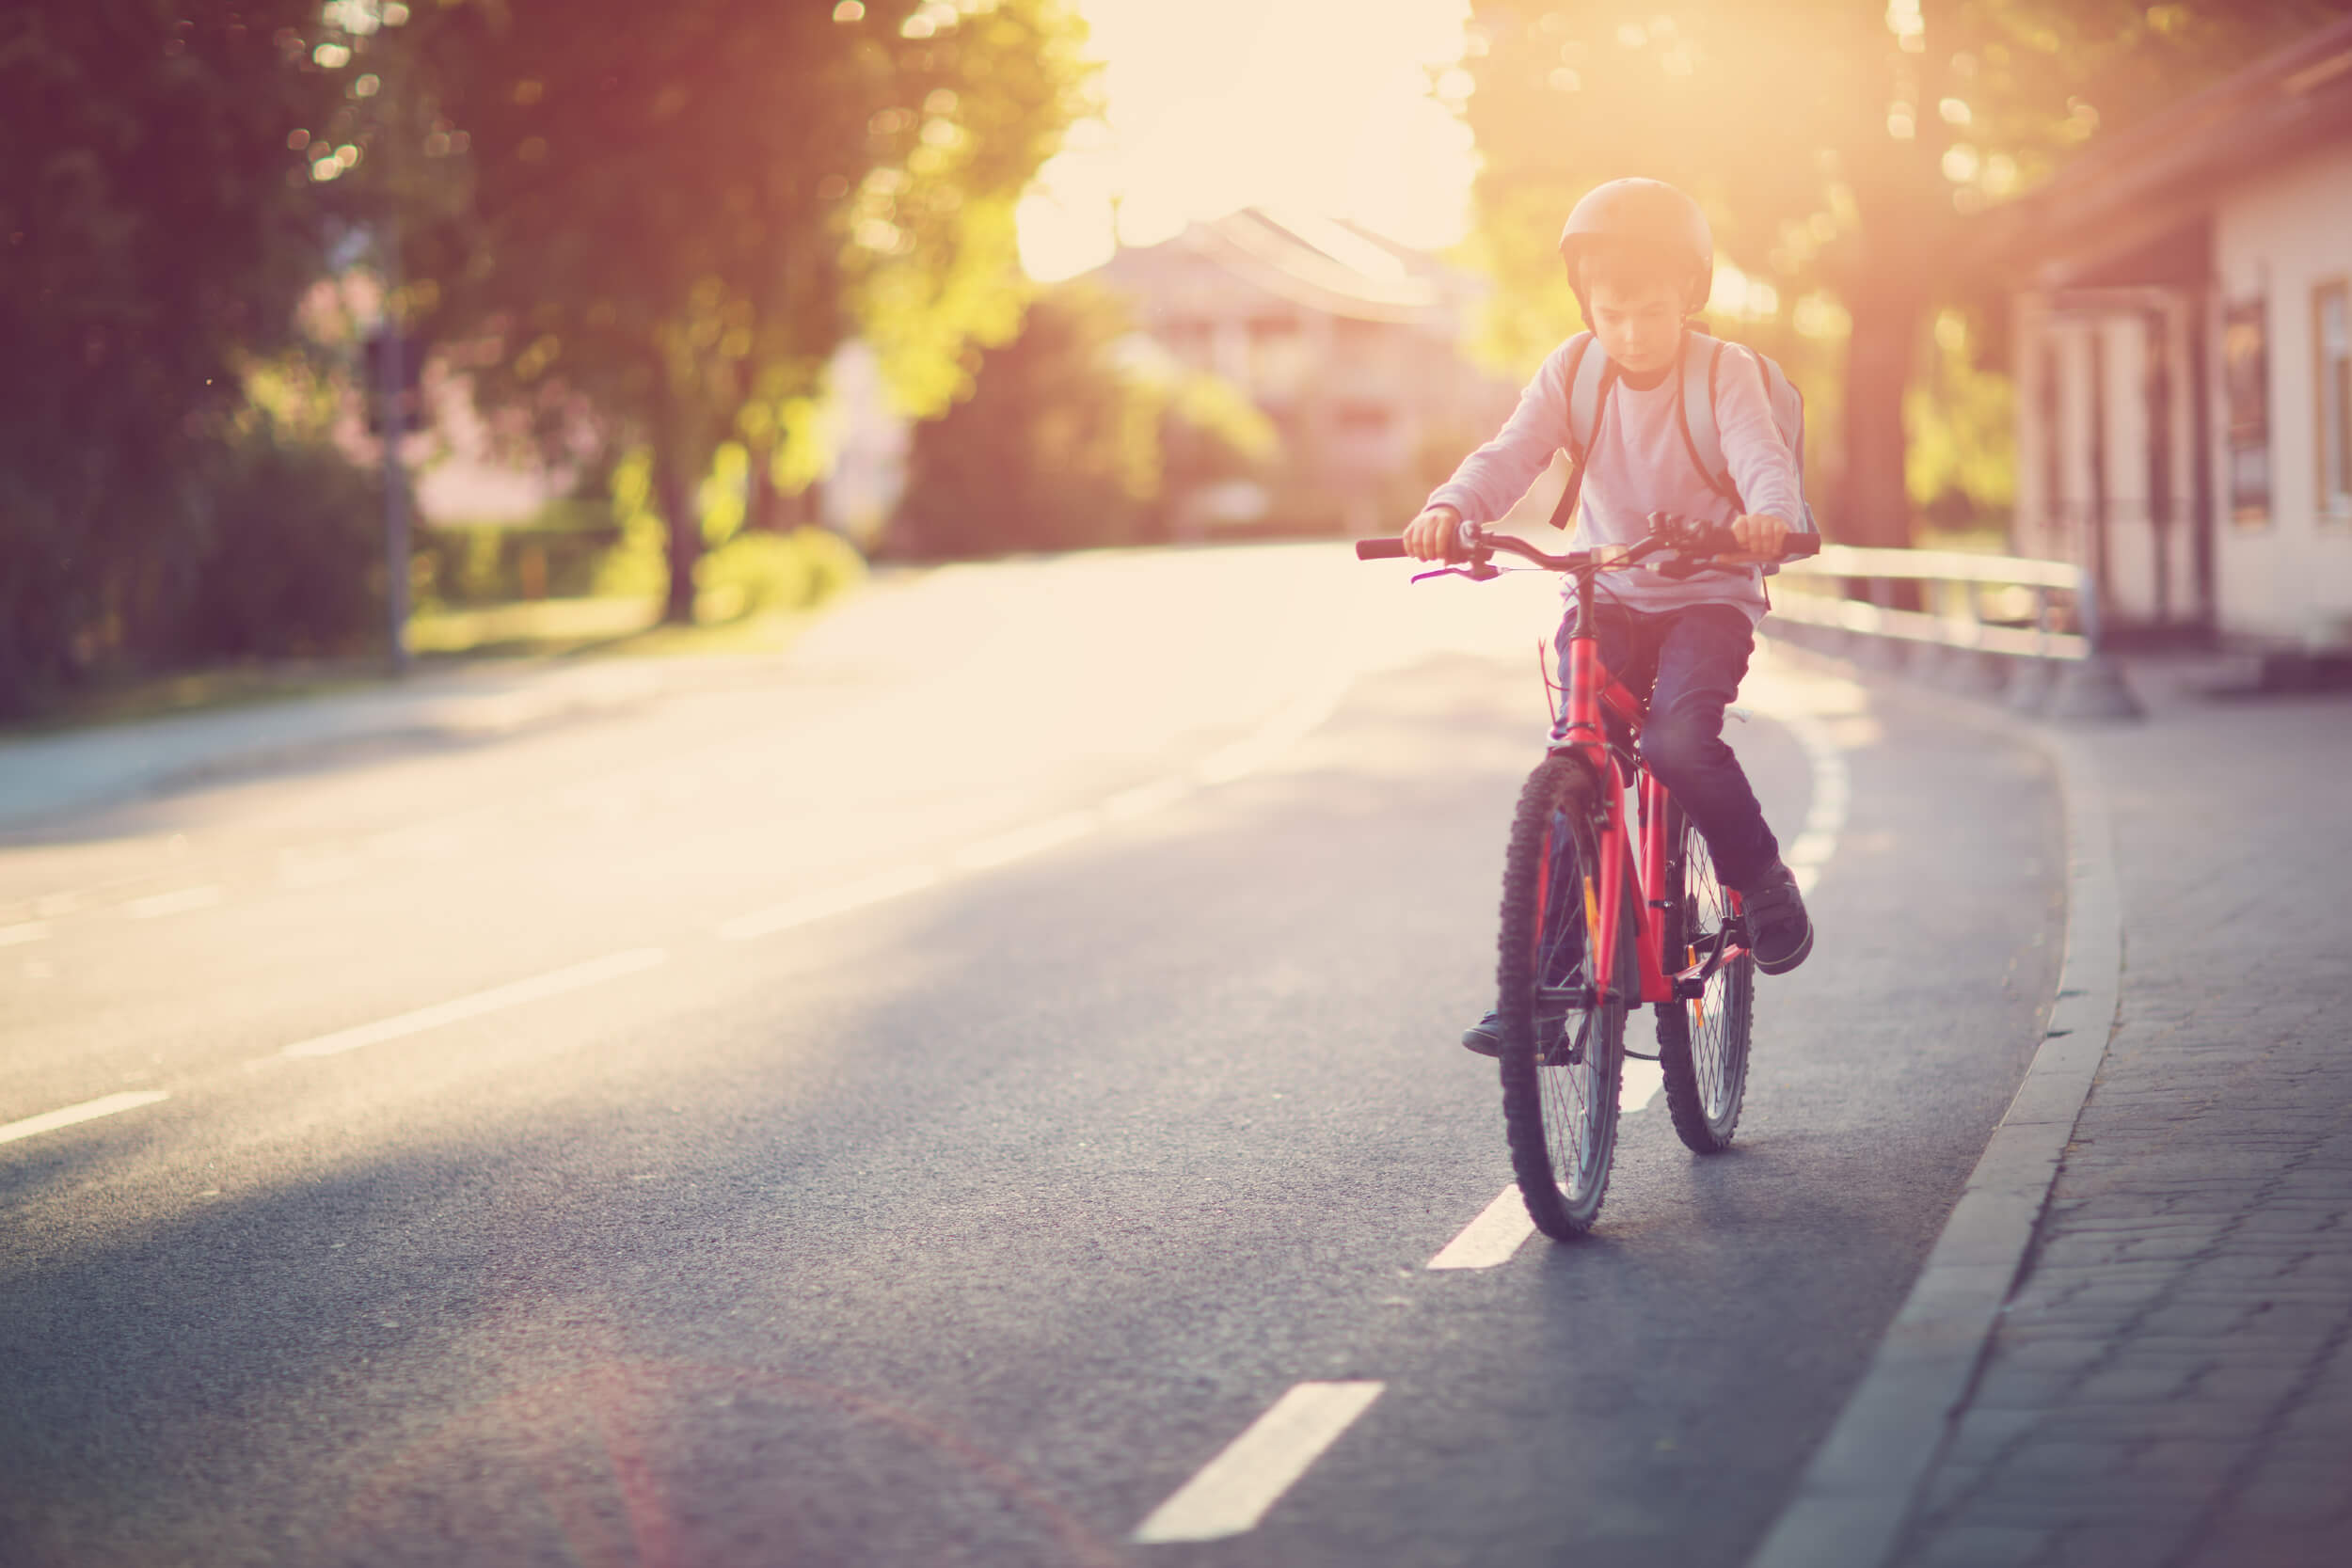 RSA & Gardai urge drivers to be extra cautious as more children cycle and walk to school